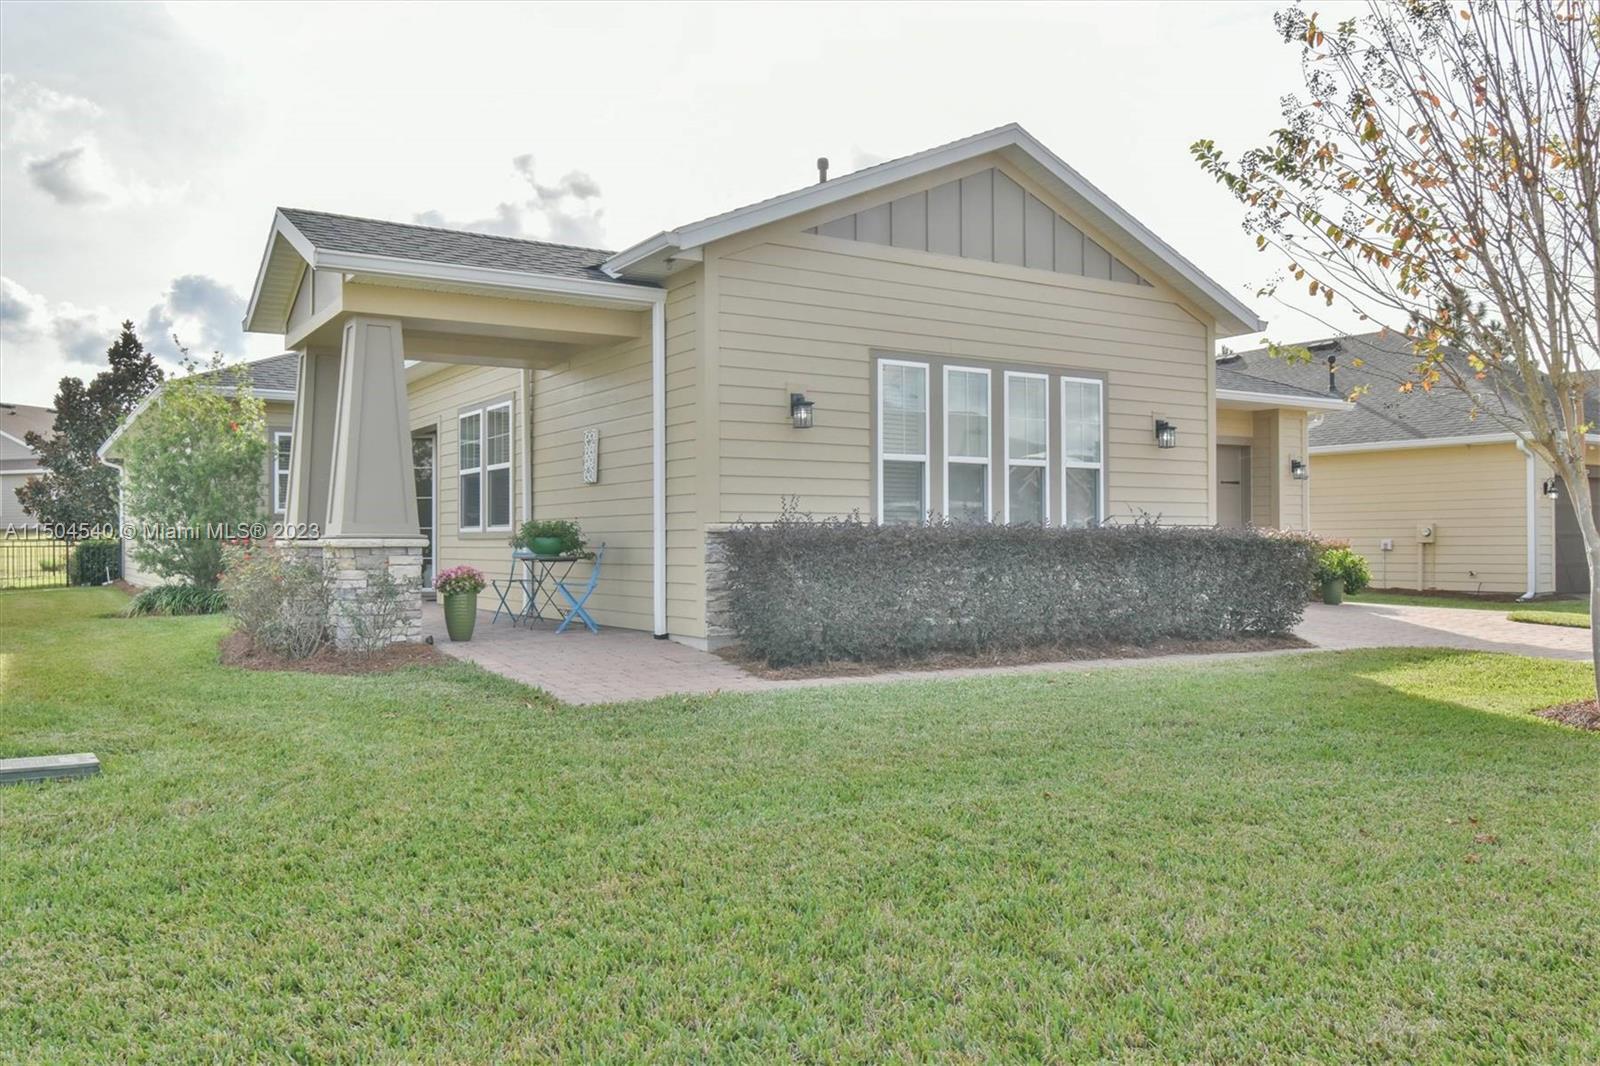 Photo of 5106 NW 35th Lane Rd in Ocala, FL